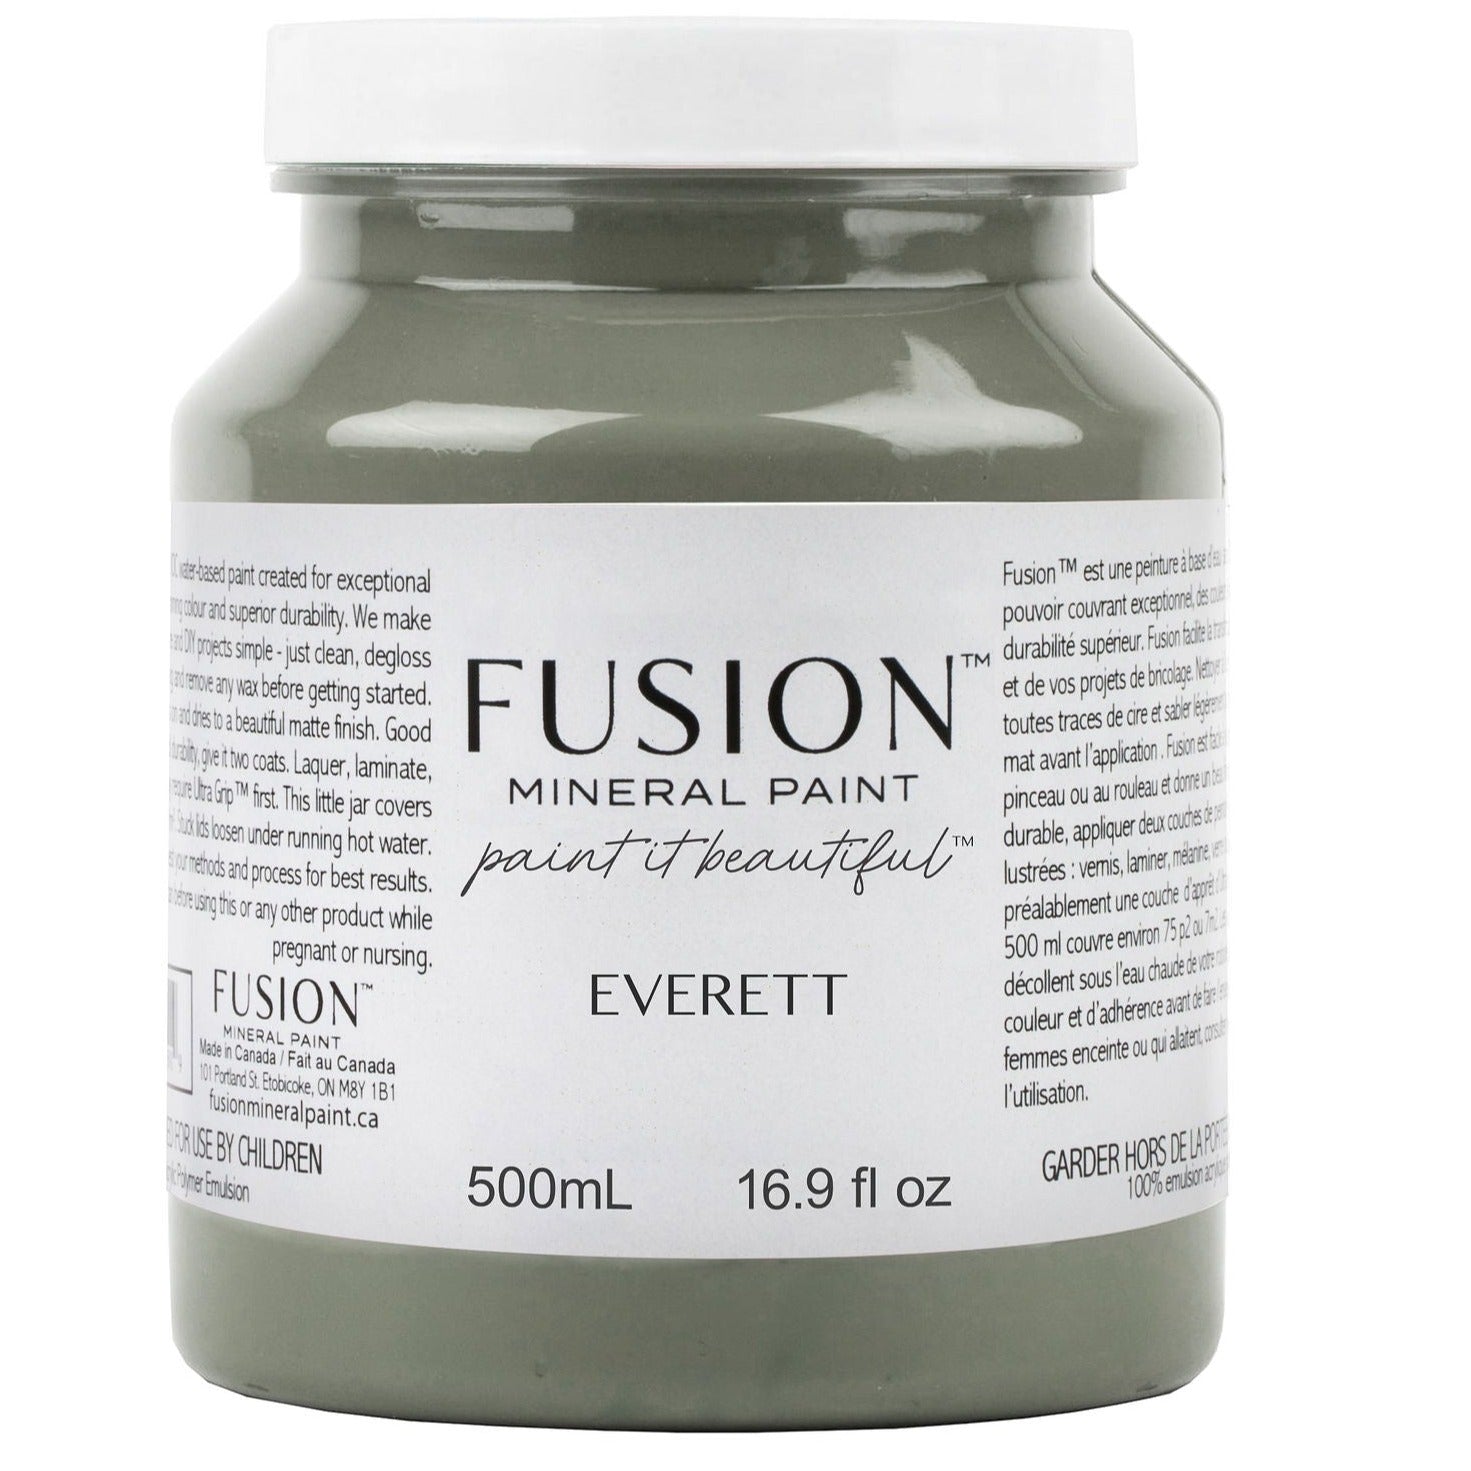 Everett Fusion Mineral Paint @ The Painted Heirloom